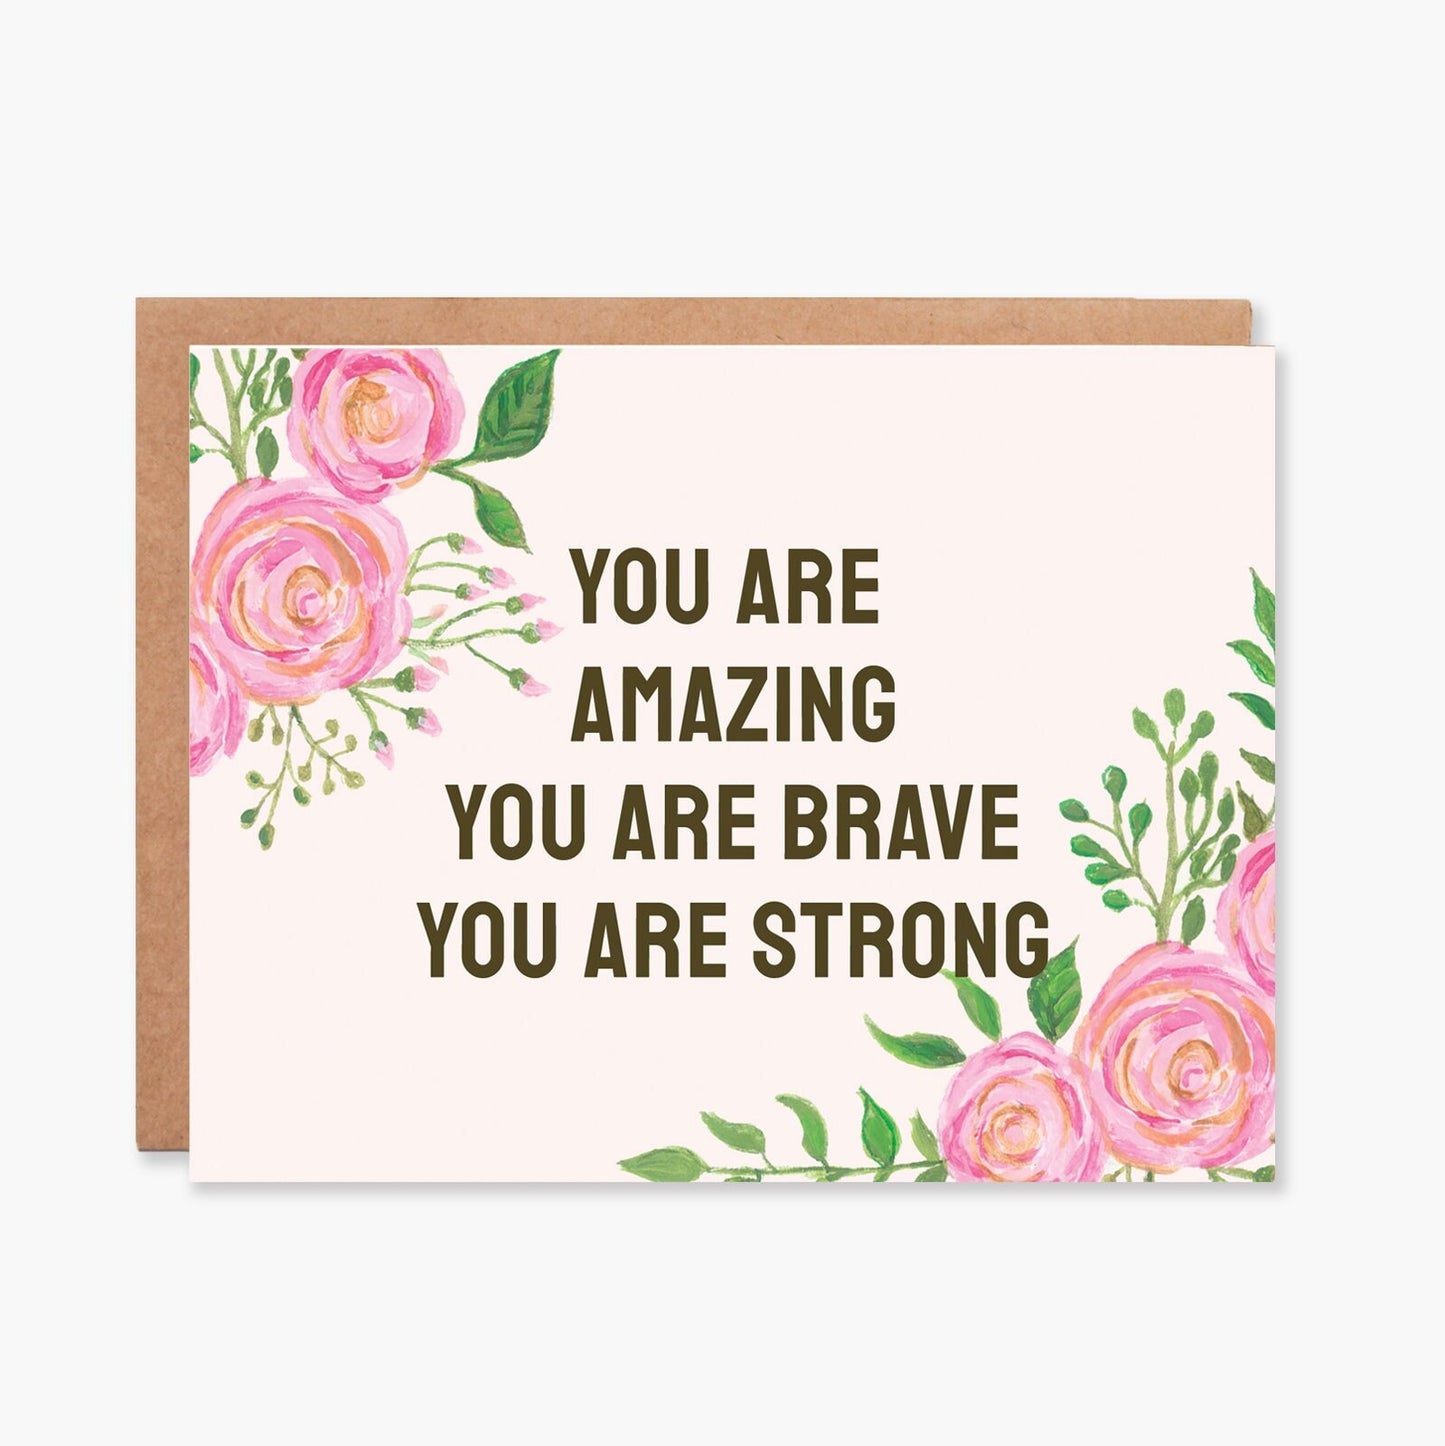 Sympathy Card, Compassion Card, Thinking of You Card, , Divorce Card, Difficult Time, Condolence Card, Breakup Card, Item Code - COTC S04